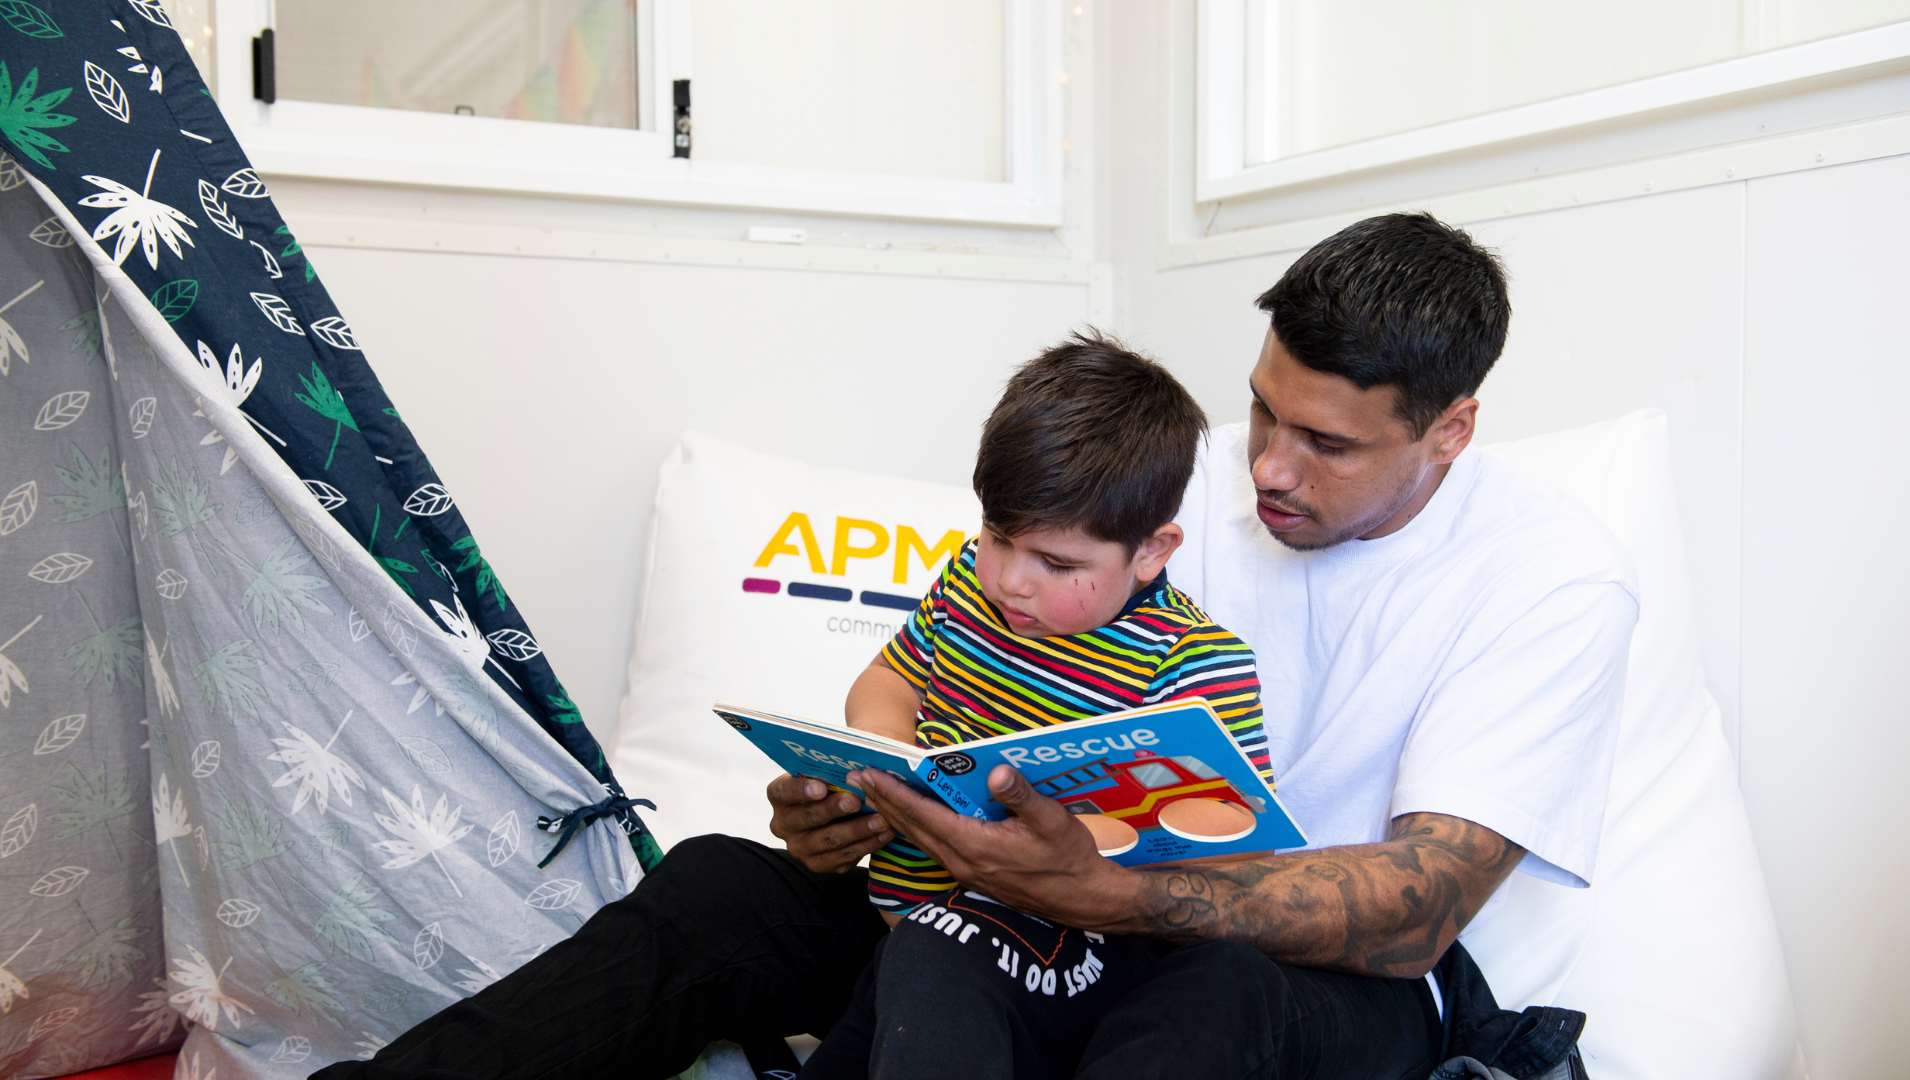 Tim Kelly sitting in the chill out zone with his son, reading a book